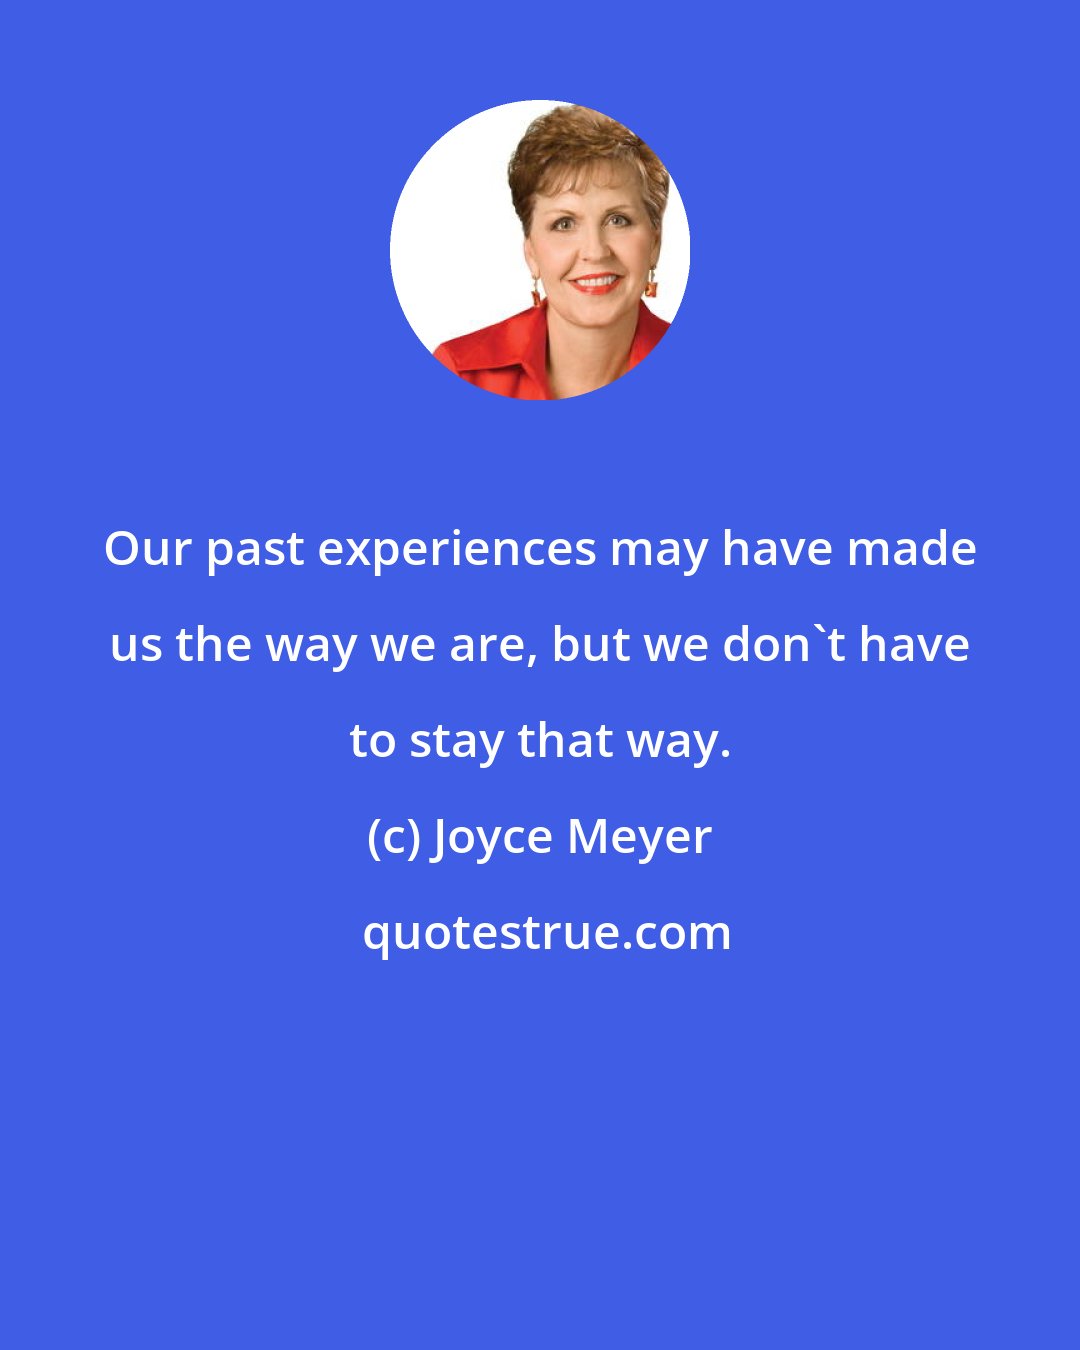 Joyce Meyer: Our past experiences may have made us the way we are, but we don't have to stay that way.